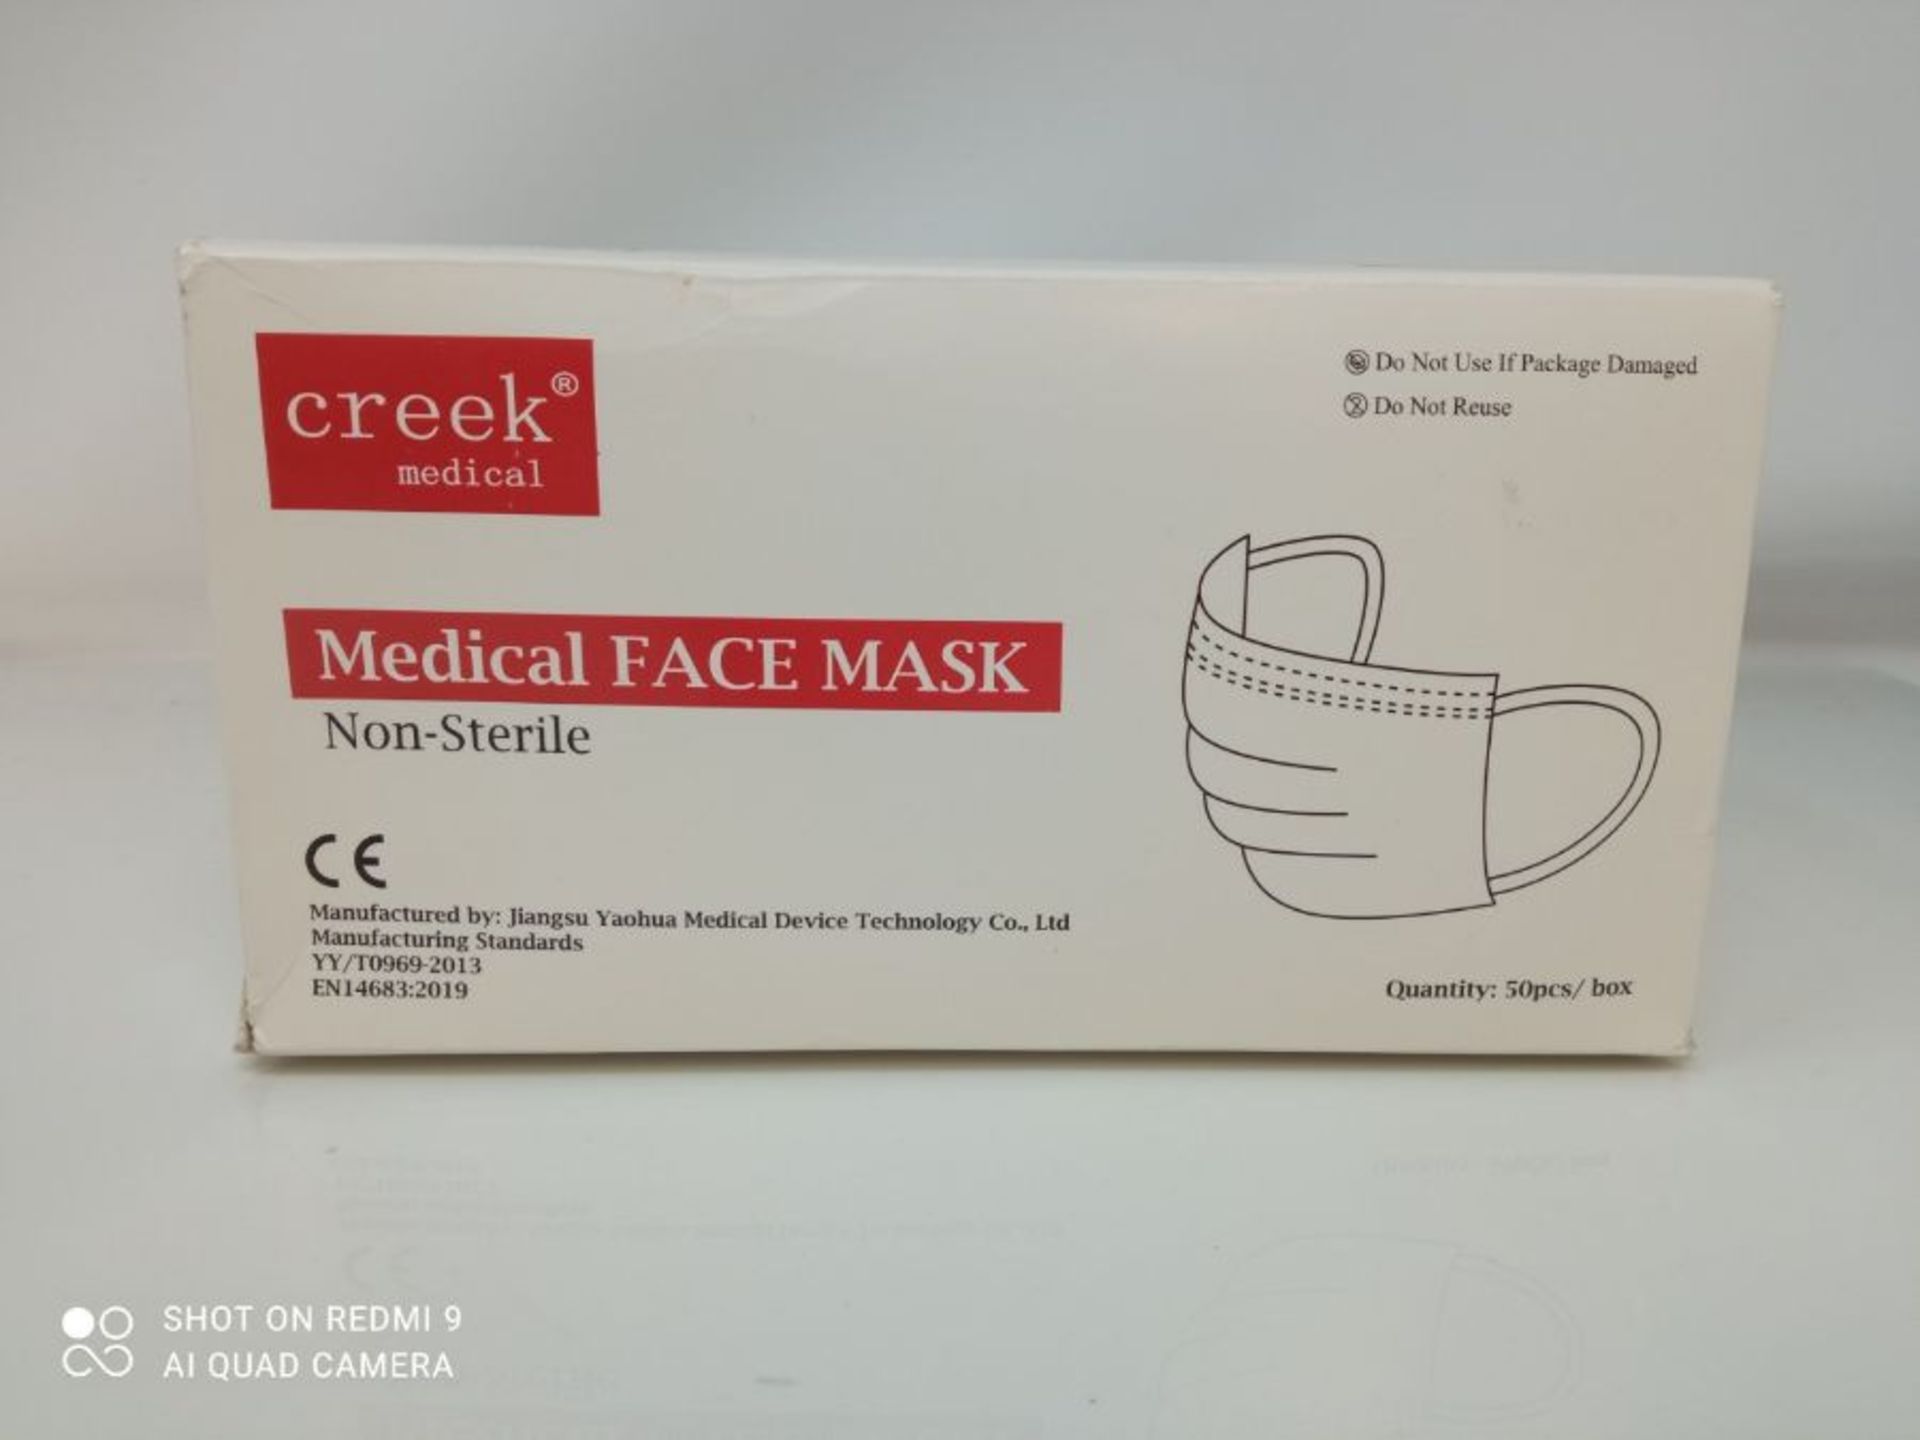 creek medical CE Approved and Tested 3-Layer Medical Surgical Mask Type I, Non-Sterile - Image 3 of 3